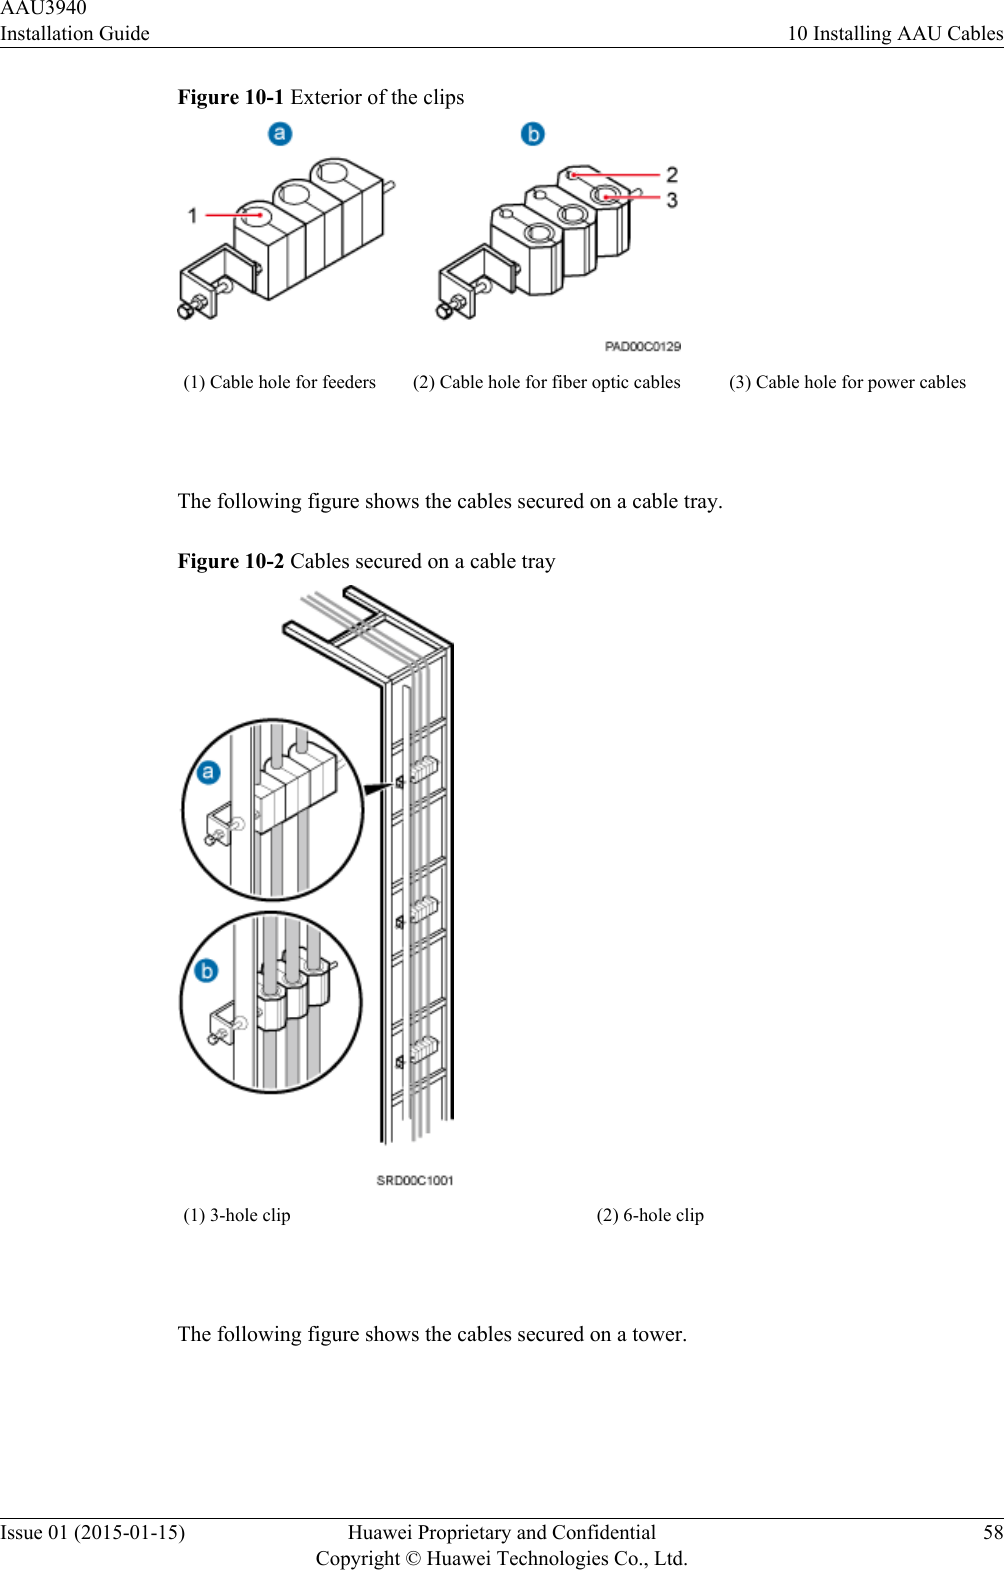 Figure 10-1 Exterior of the clips(1) Cable hole for feeders (2) Cable hole for fiber optic cables (3) Cable hole for power cables The following figure shows the cables secured on a cable tray.Figure 10-2 Cables secured on a cable tray(1) 3-hole clip (2) 6-hole clip The following figure shows the cables secured on a tower.AAU3940Installation Guide 10 Installing AAU CablesIssue 01 (2015-01-15) Huawei Proprietary and ConfidentialCopyright © Huawei Technologies Co., Ltd.58